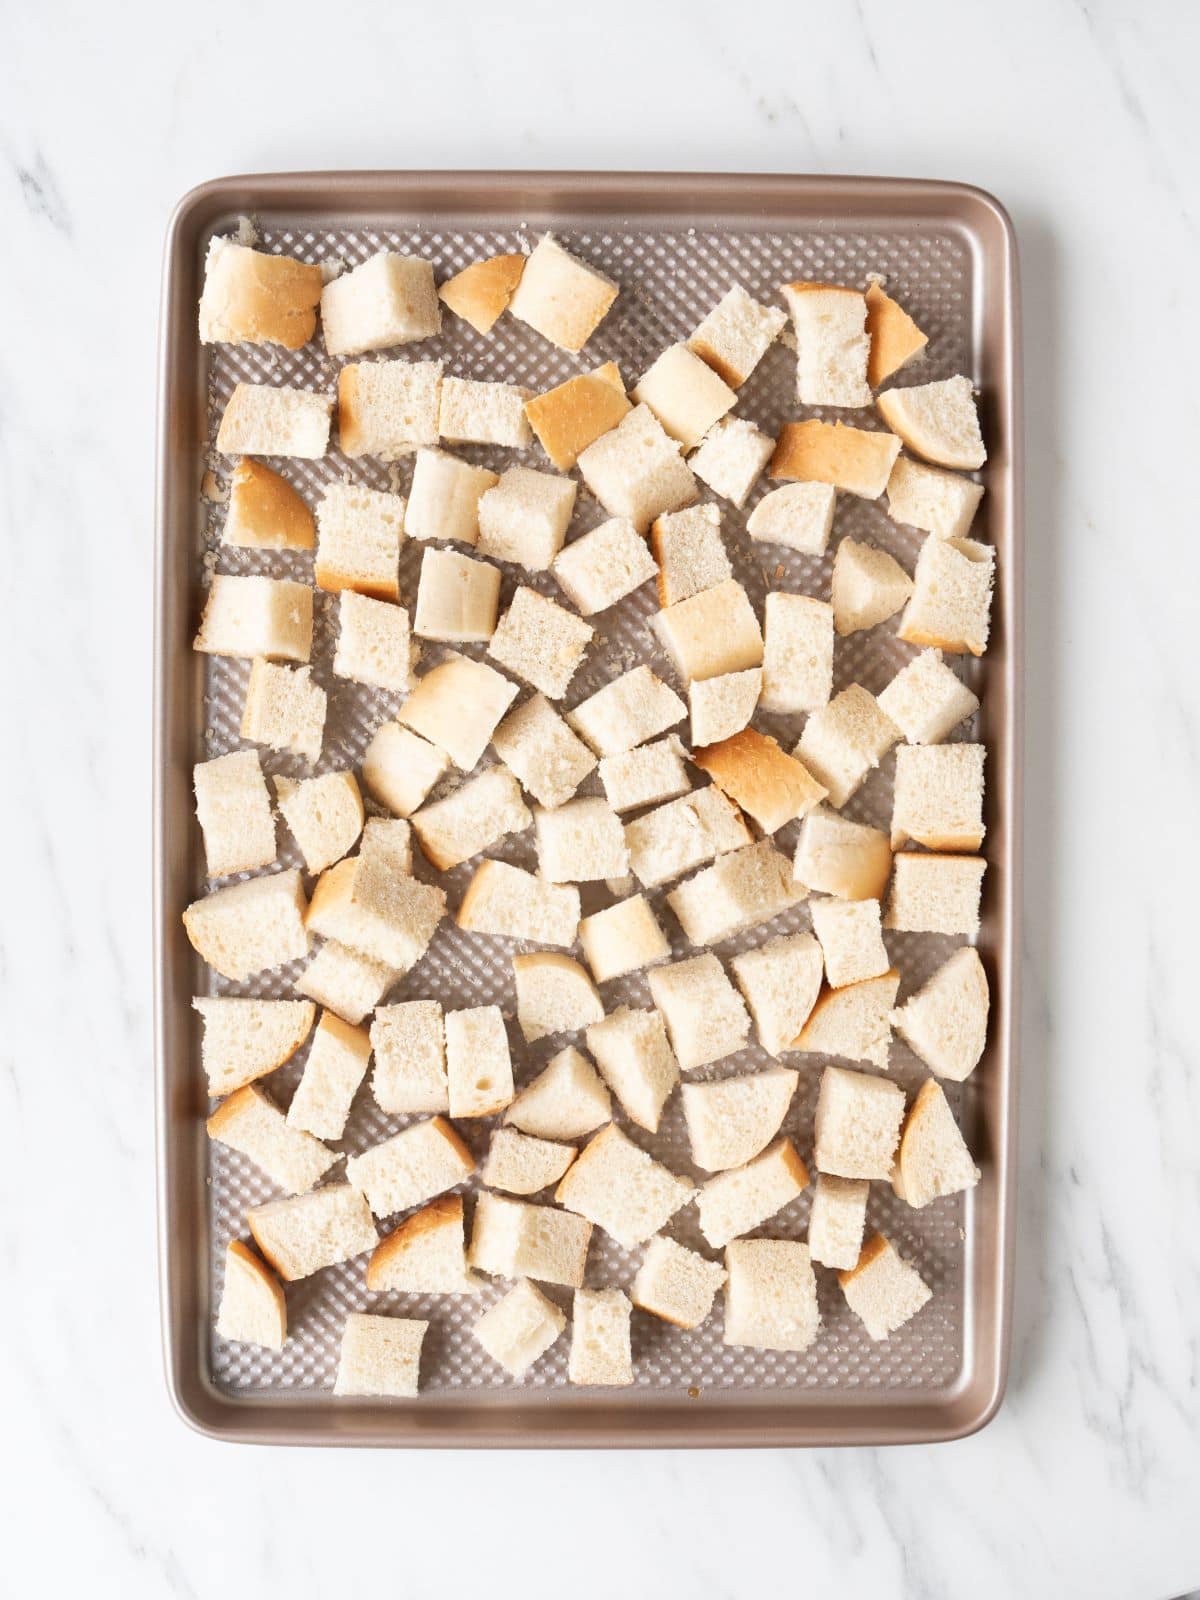 A baking sheet with cubes of bread.